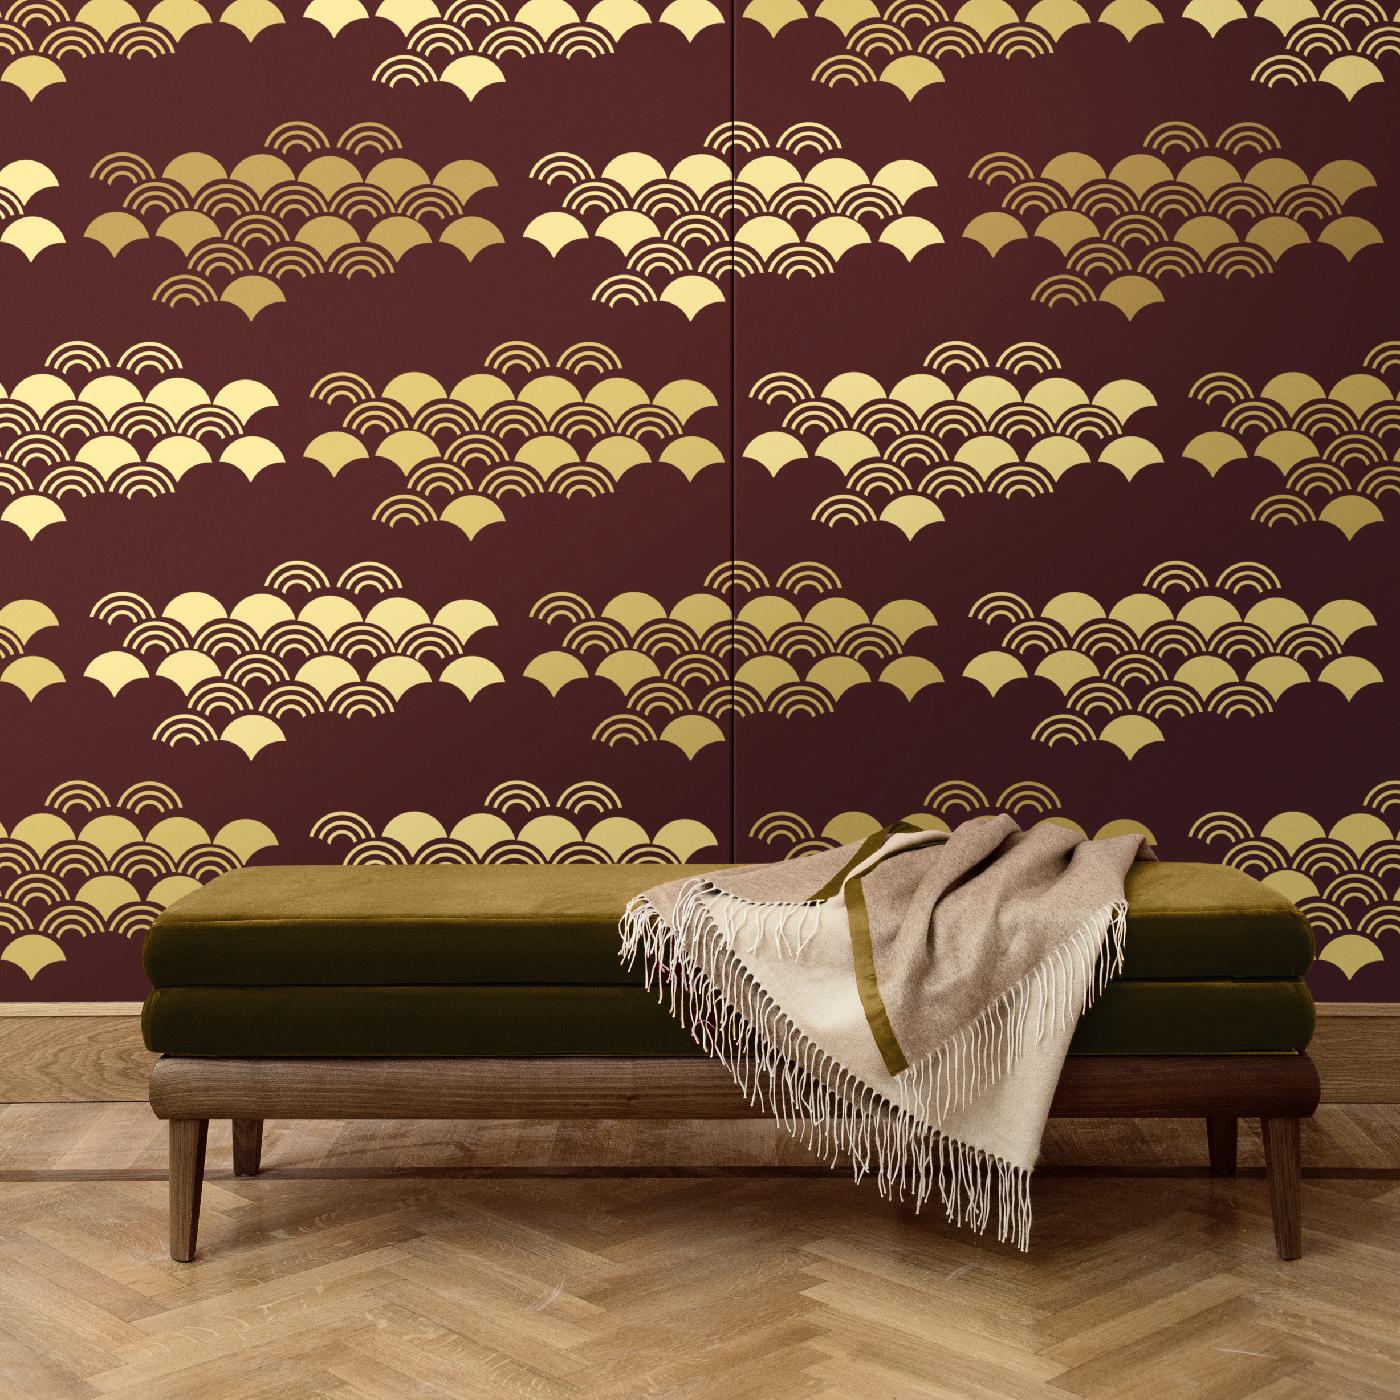 Part of the Japanese Pattern collection, this elegant and modern wall covering will add a graphic accent to an eclectic or contemporary interior, adding the warmth of its red and yellow color palette to any room in the house. It was crafted of silk